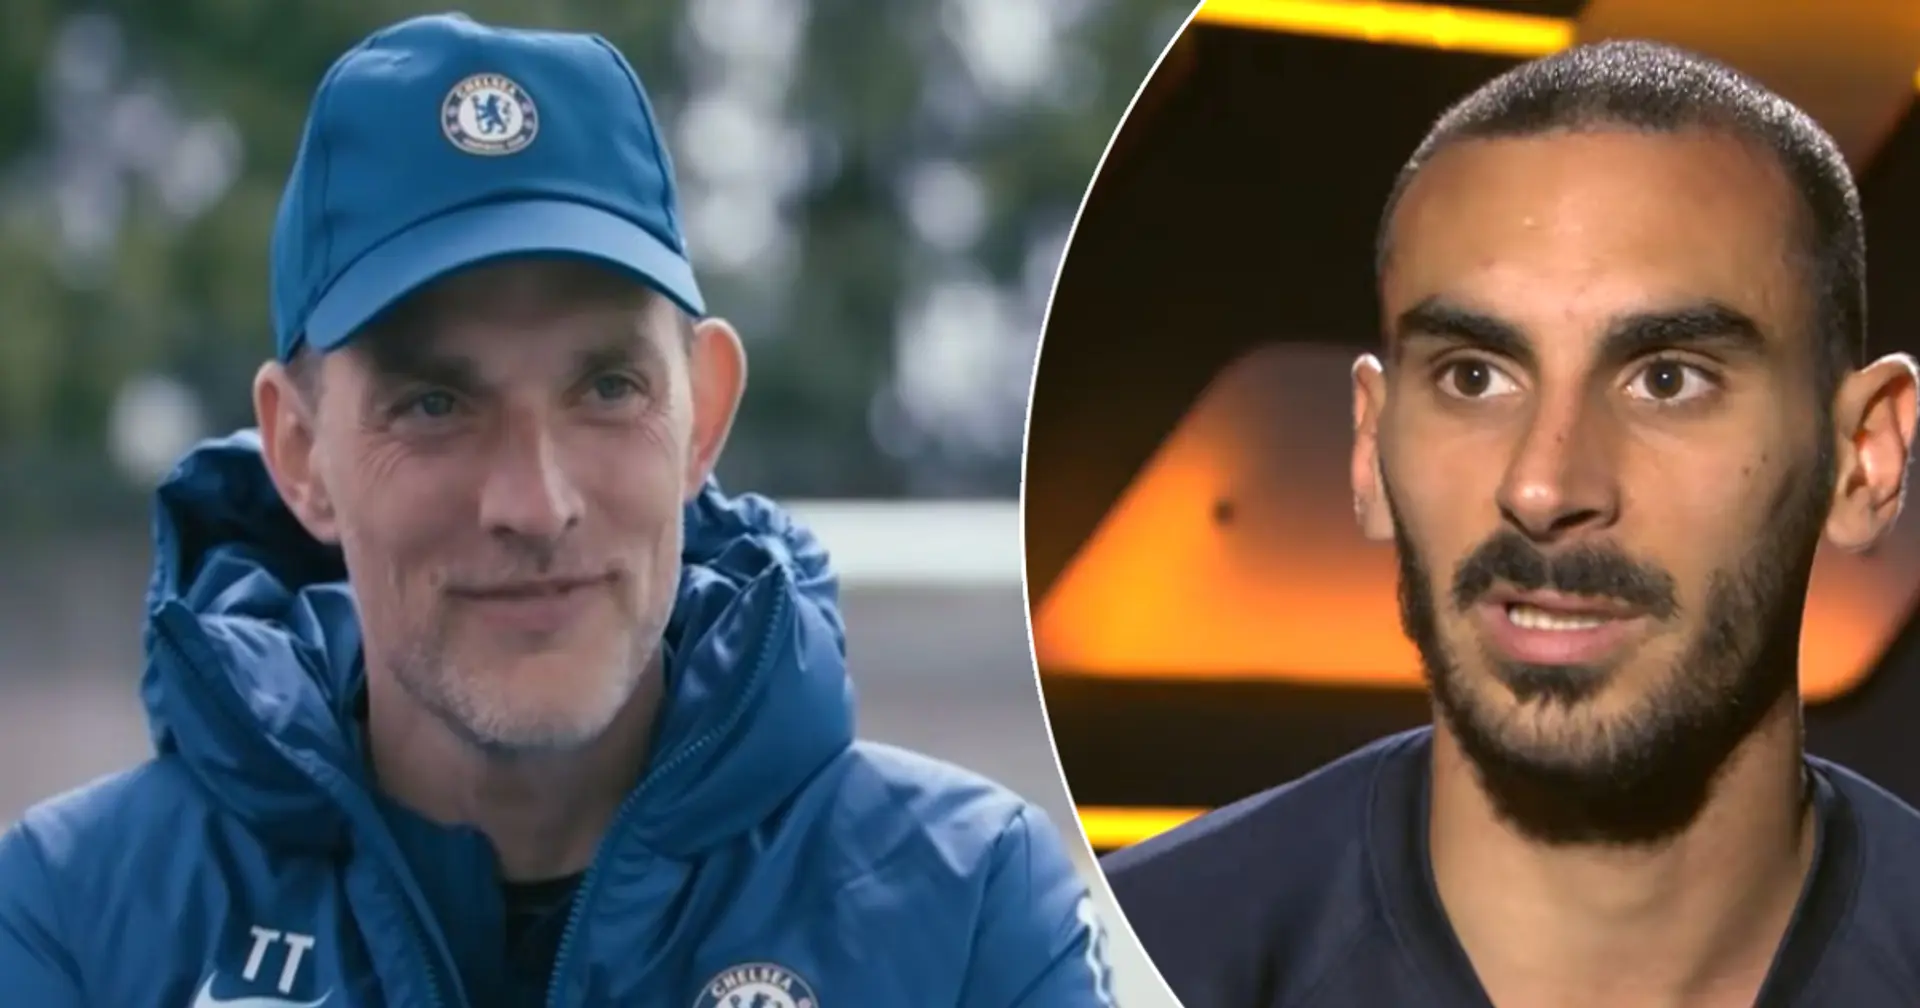 'I'm trying to push and give my 100 per cent': Zappacosta wants to impress Tuchel in B'mouth friendly